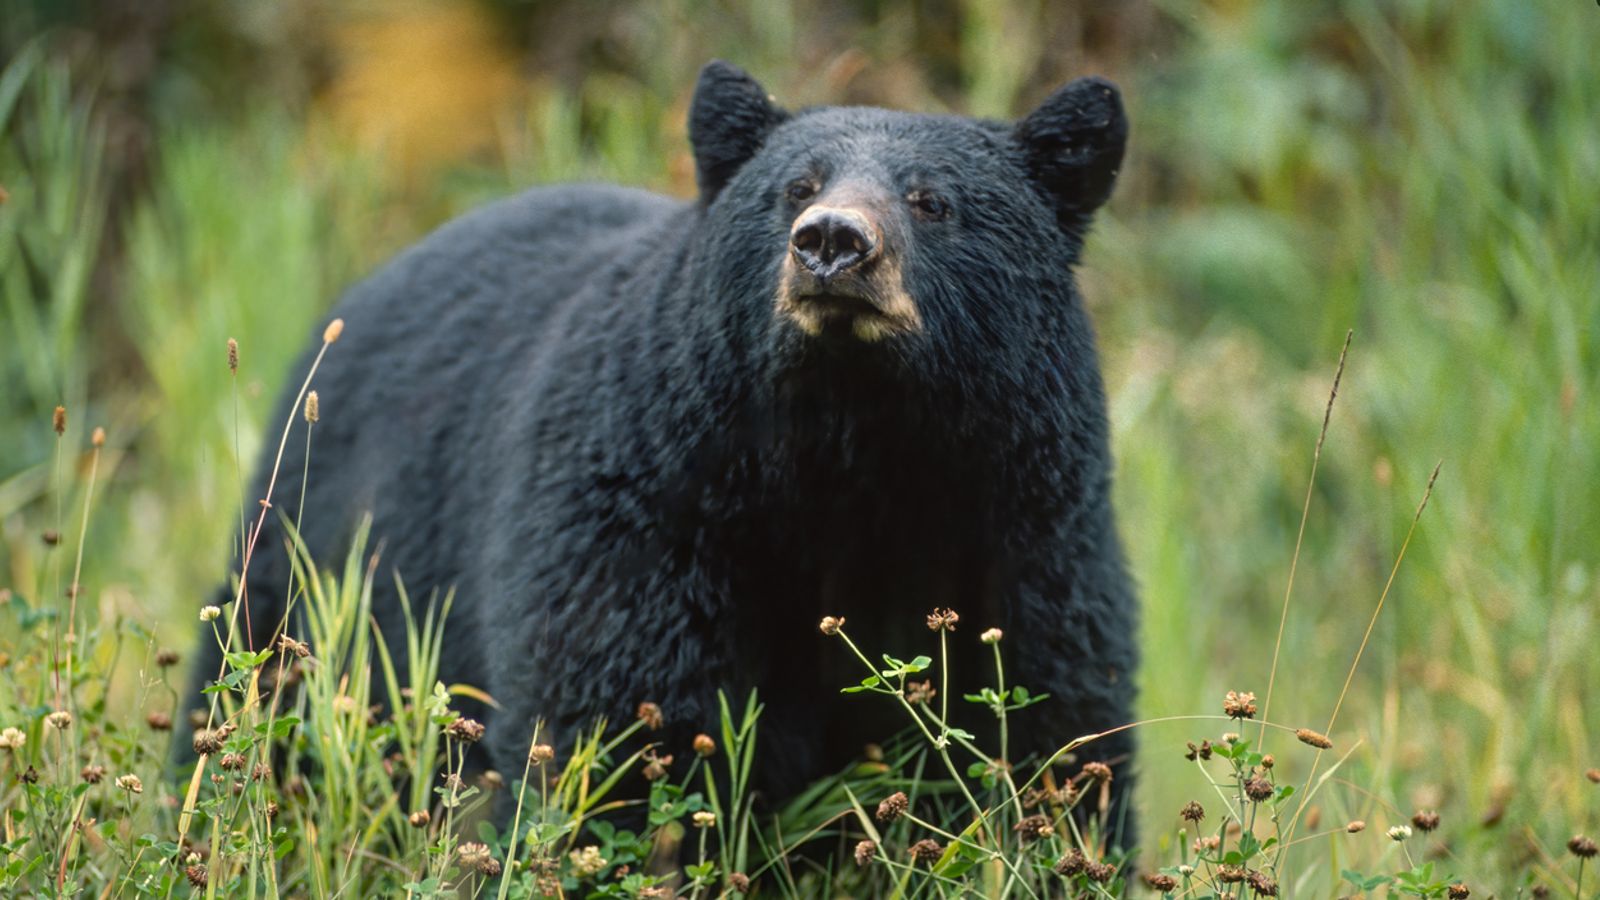 Arizona teenager saved by brother after black bear barges into cabin and attacks him